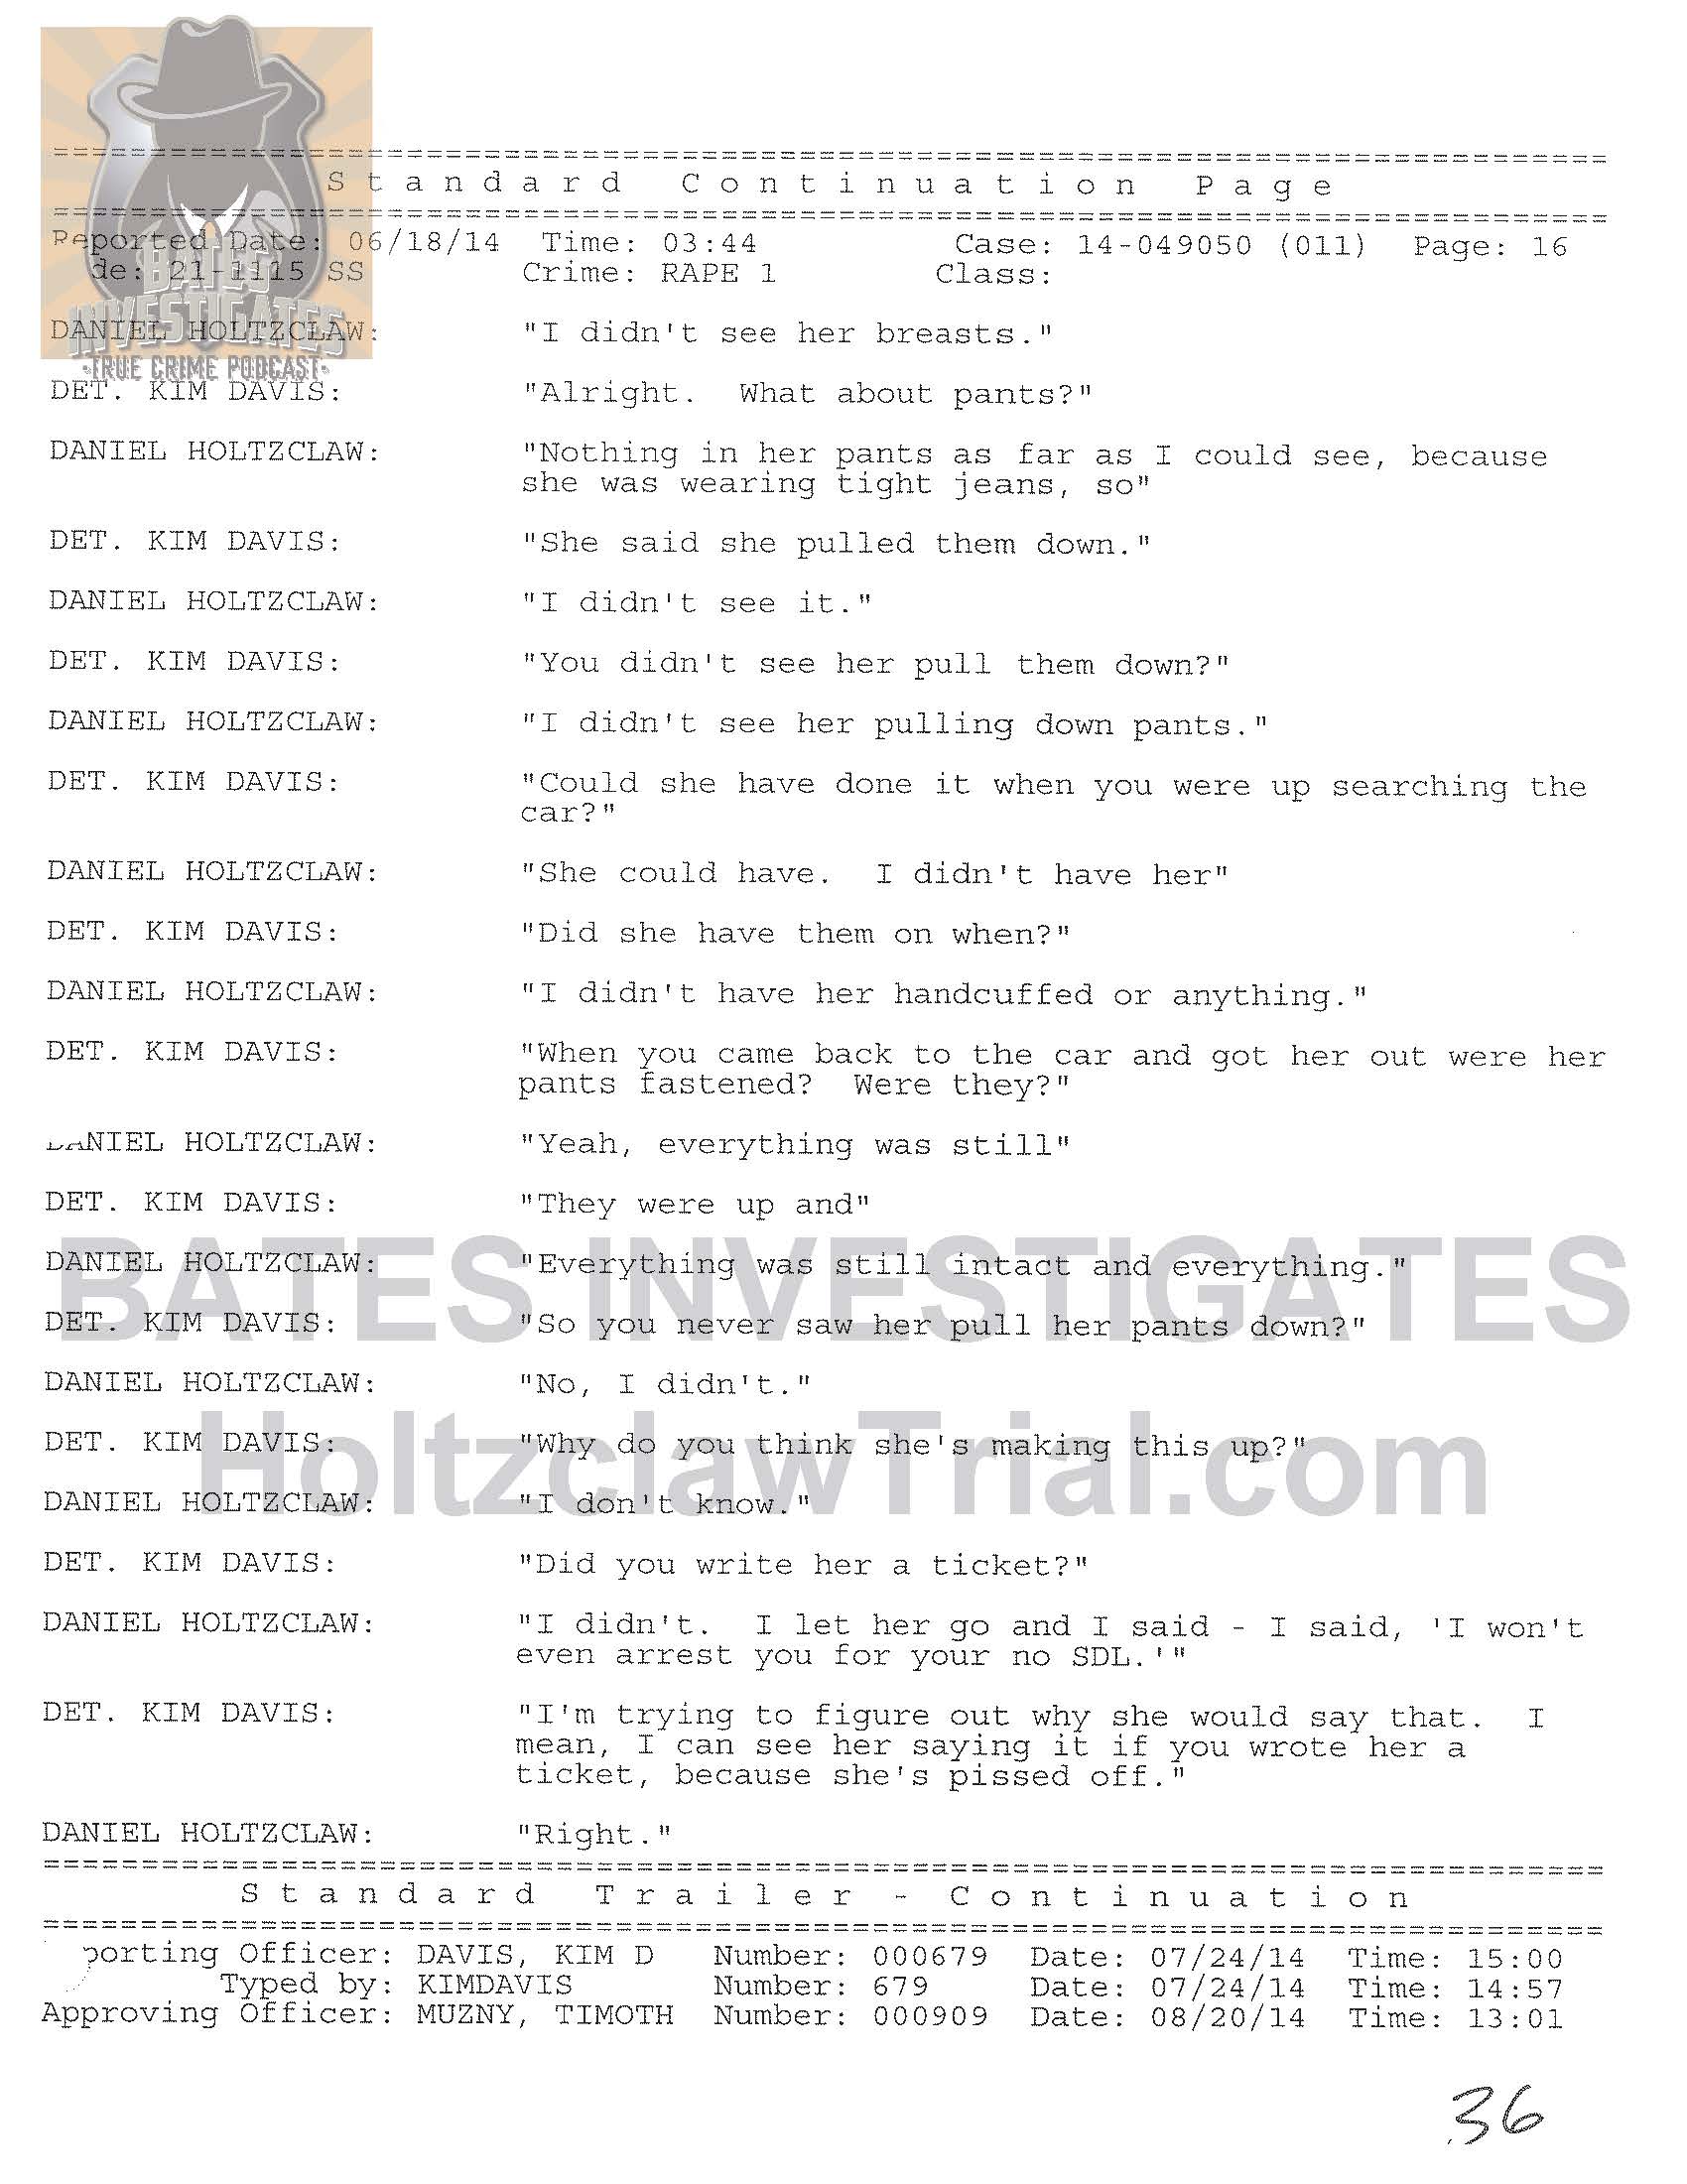 Holtzclaw Interrogation Transcript - Ep02 Redacted_Page_16.jpg